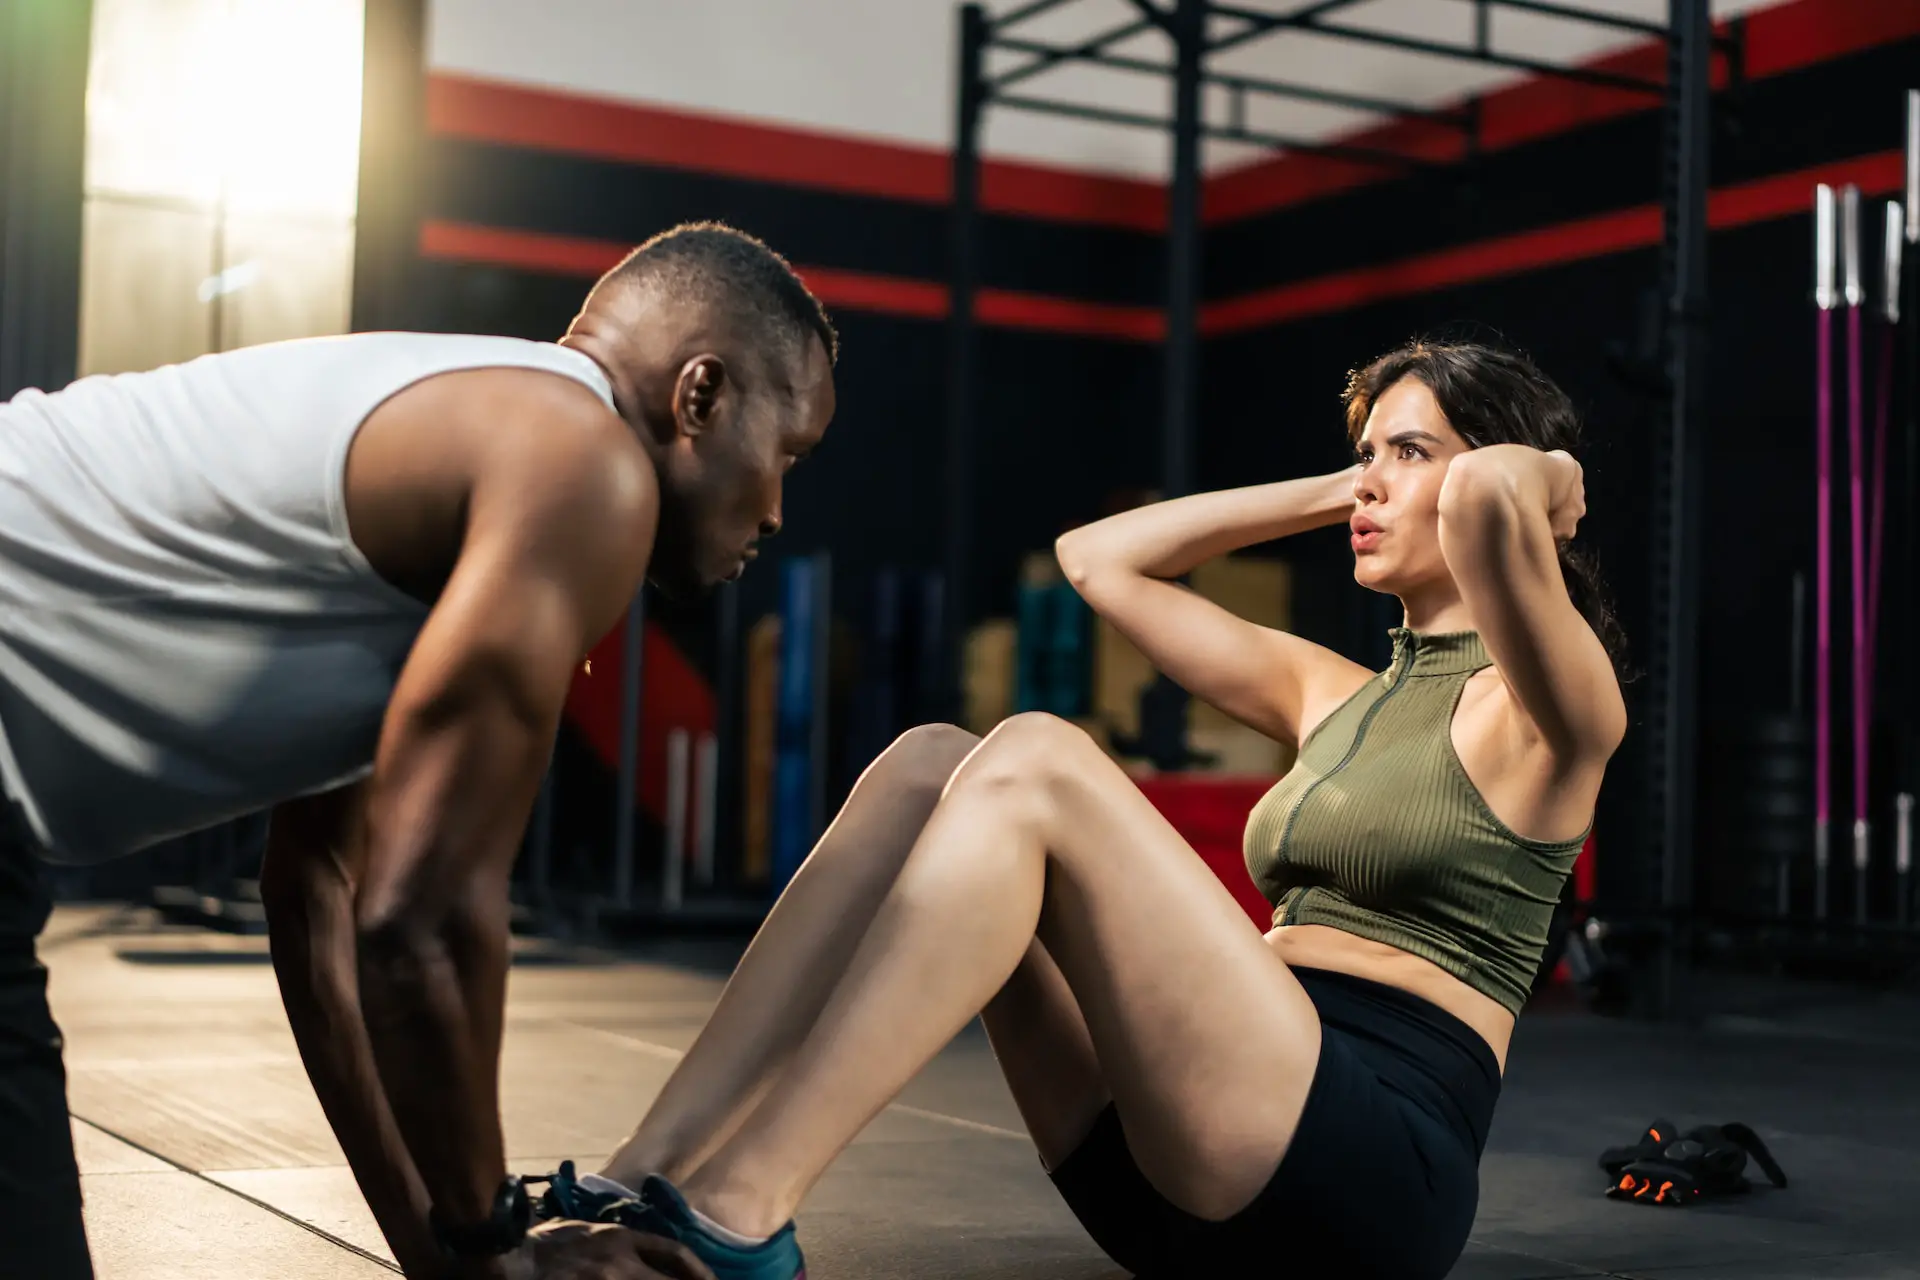 Partner assisting woman doing situps